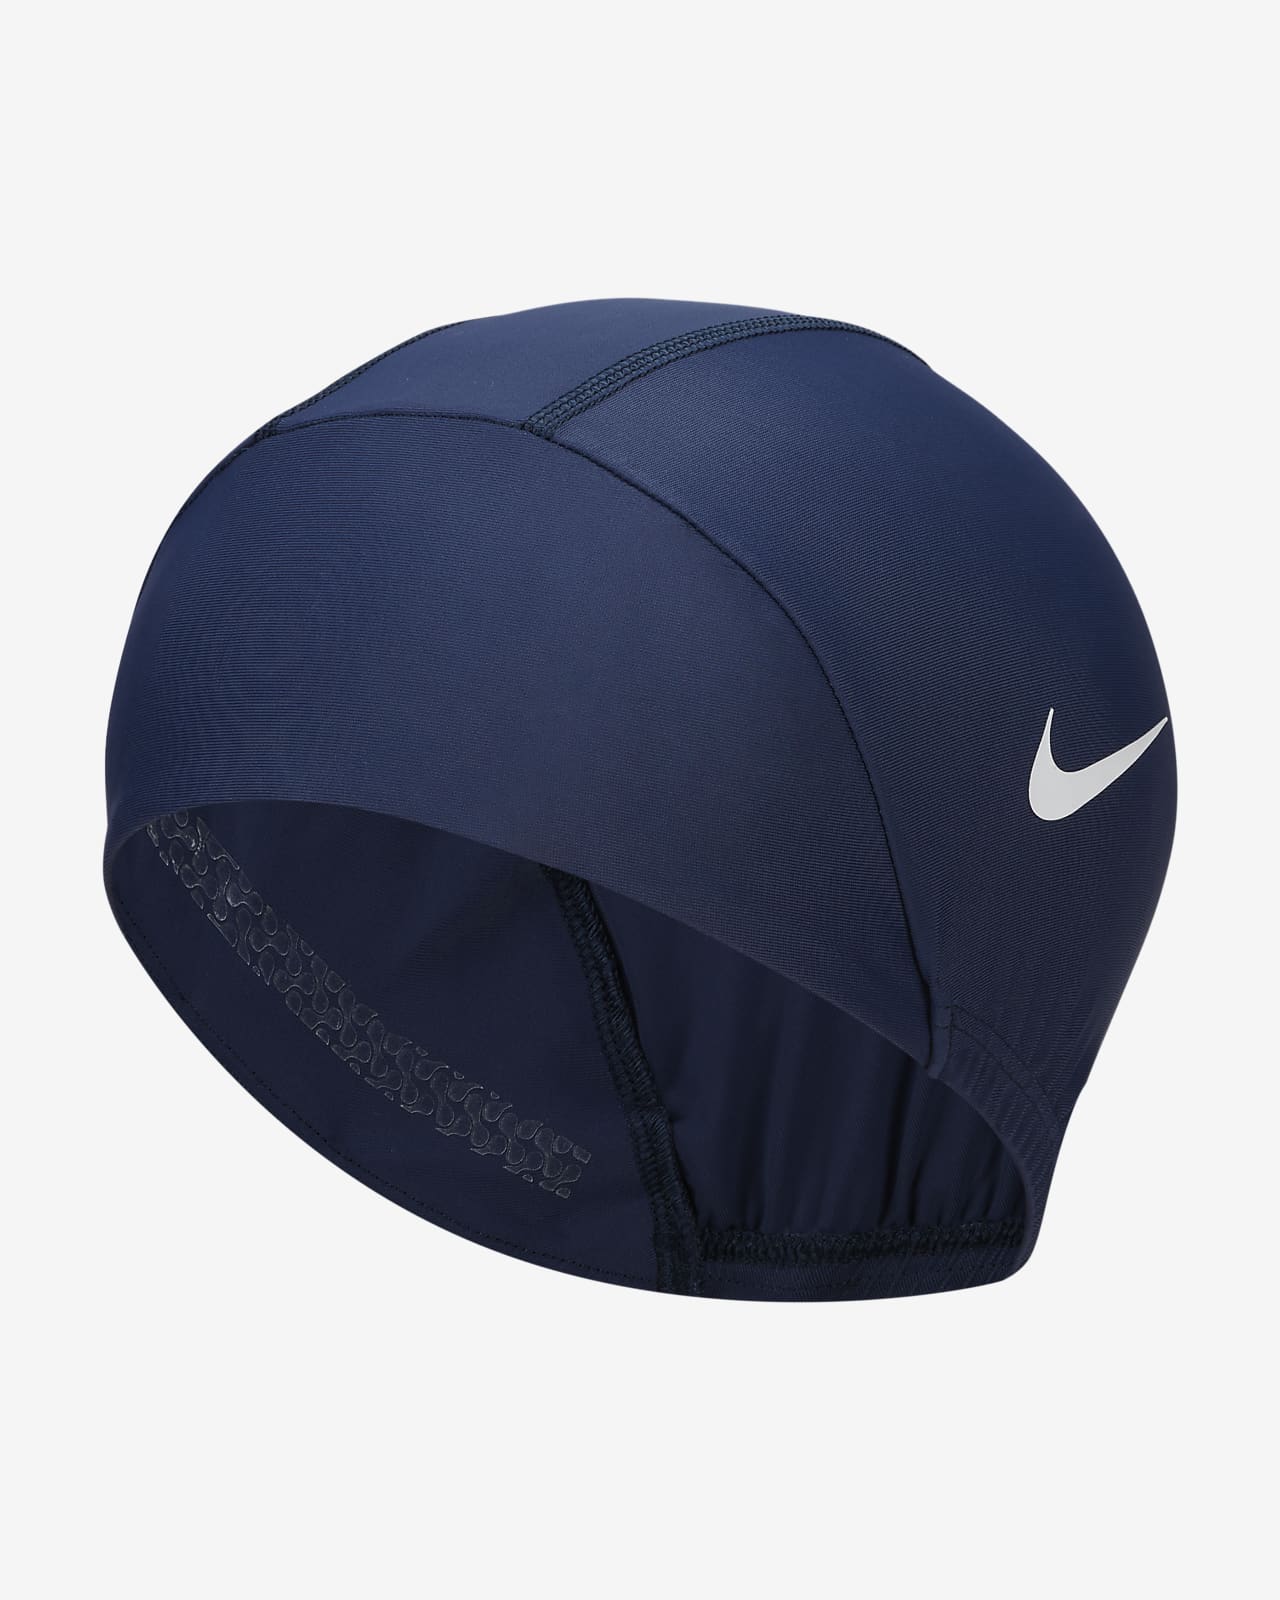 Nike Victory Women's Swimming Head Covering